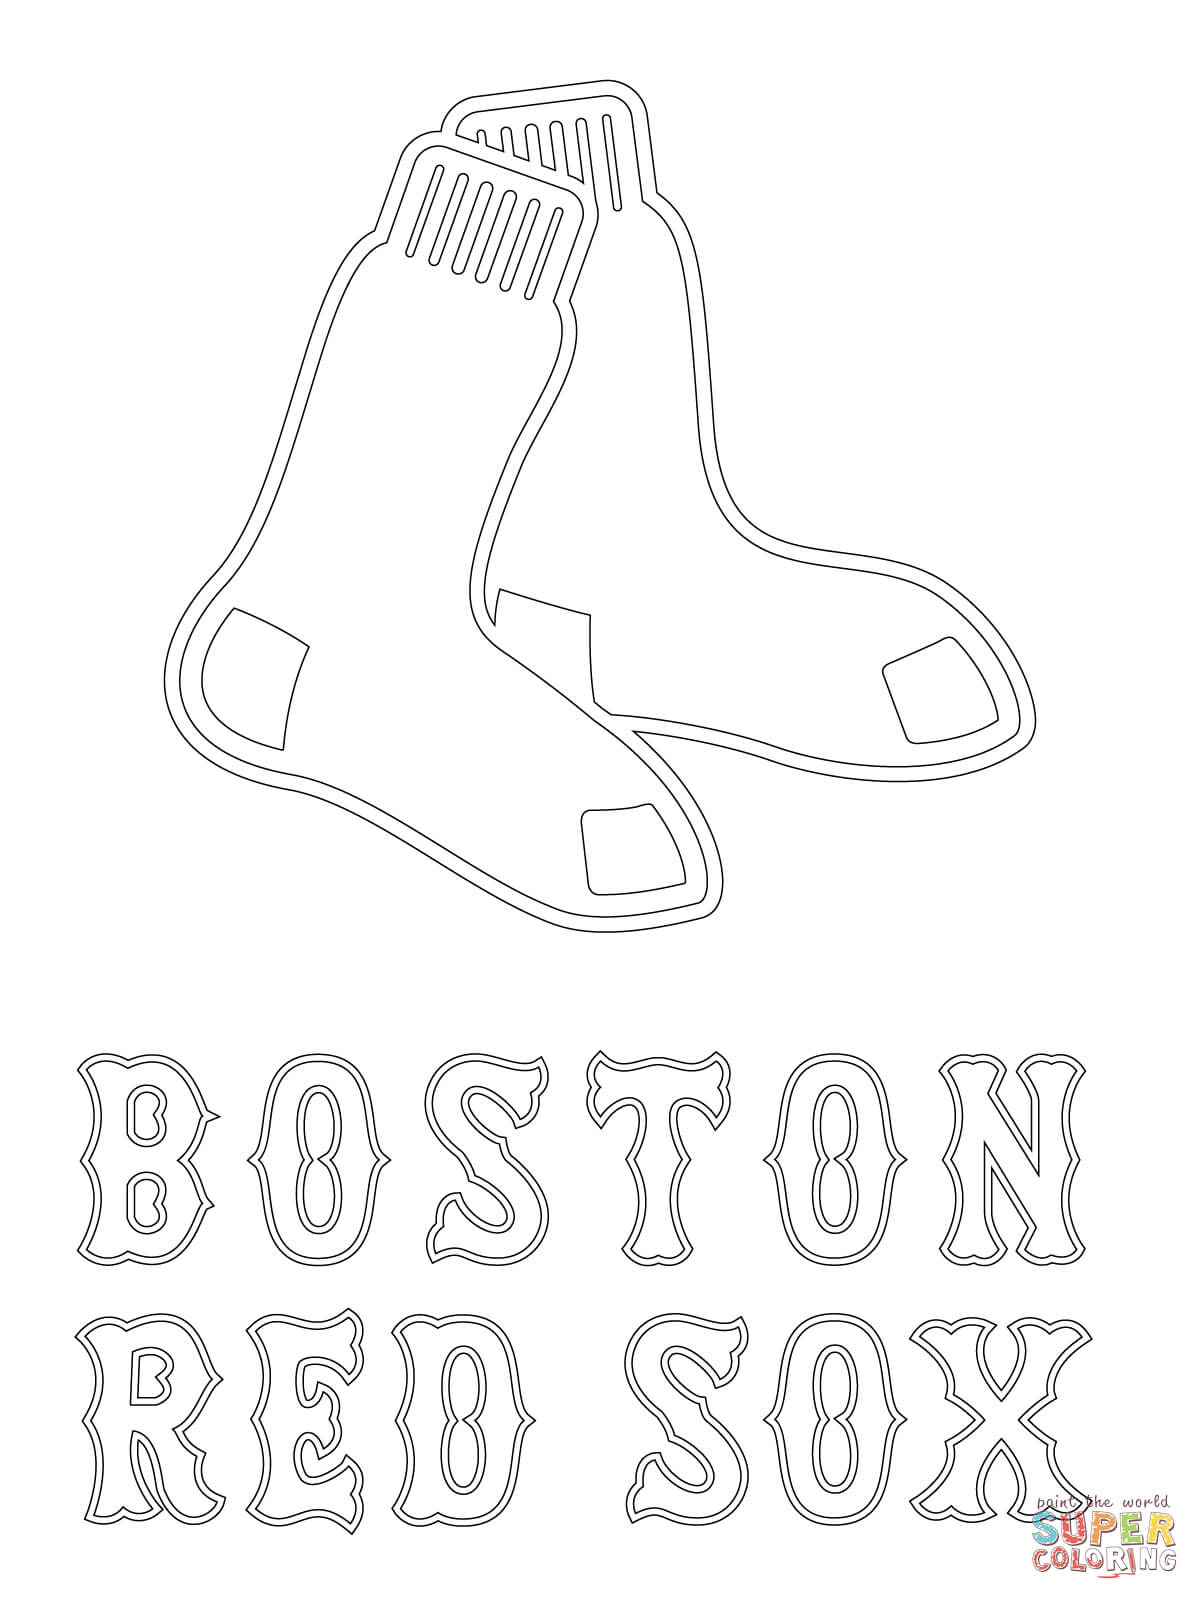 Red Sox Coloring Pages To Print - High Quality Coloring Pages